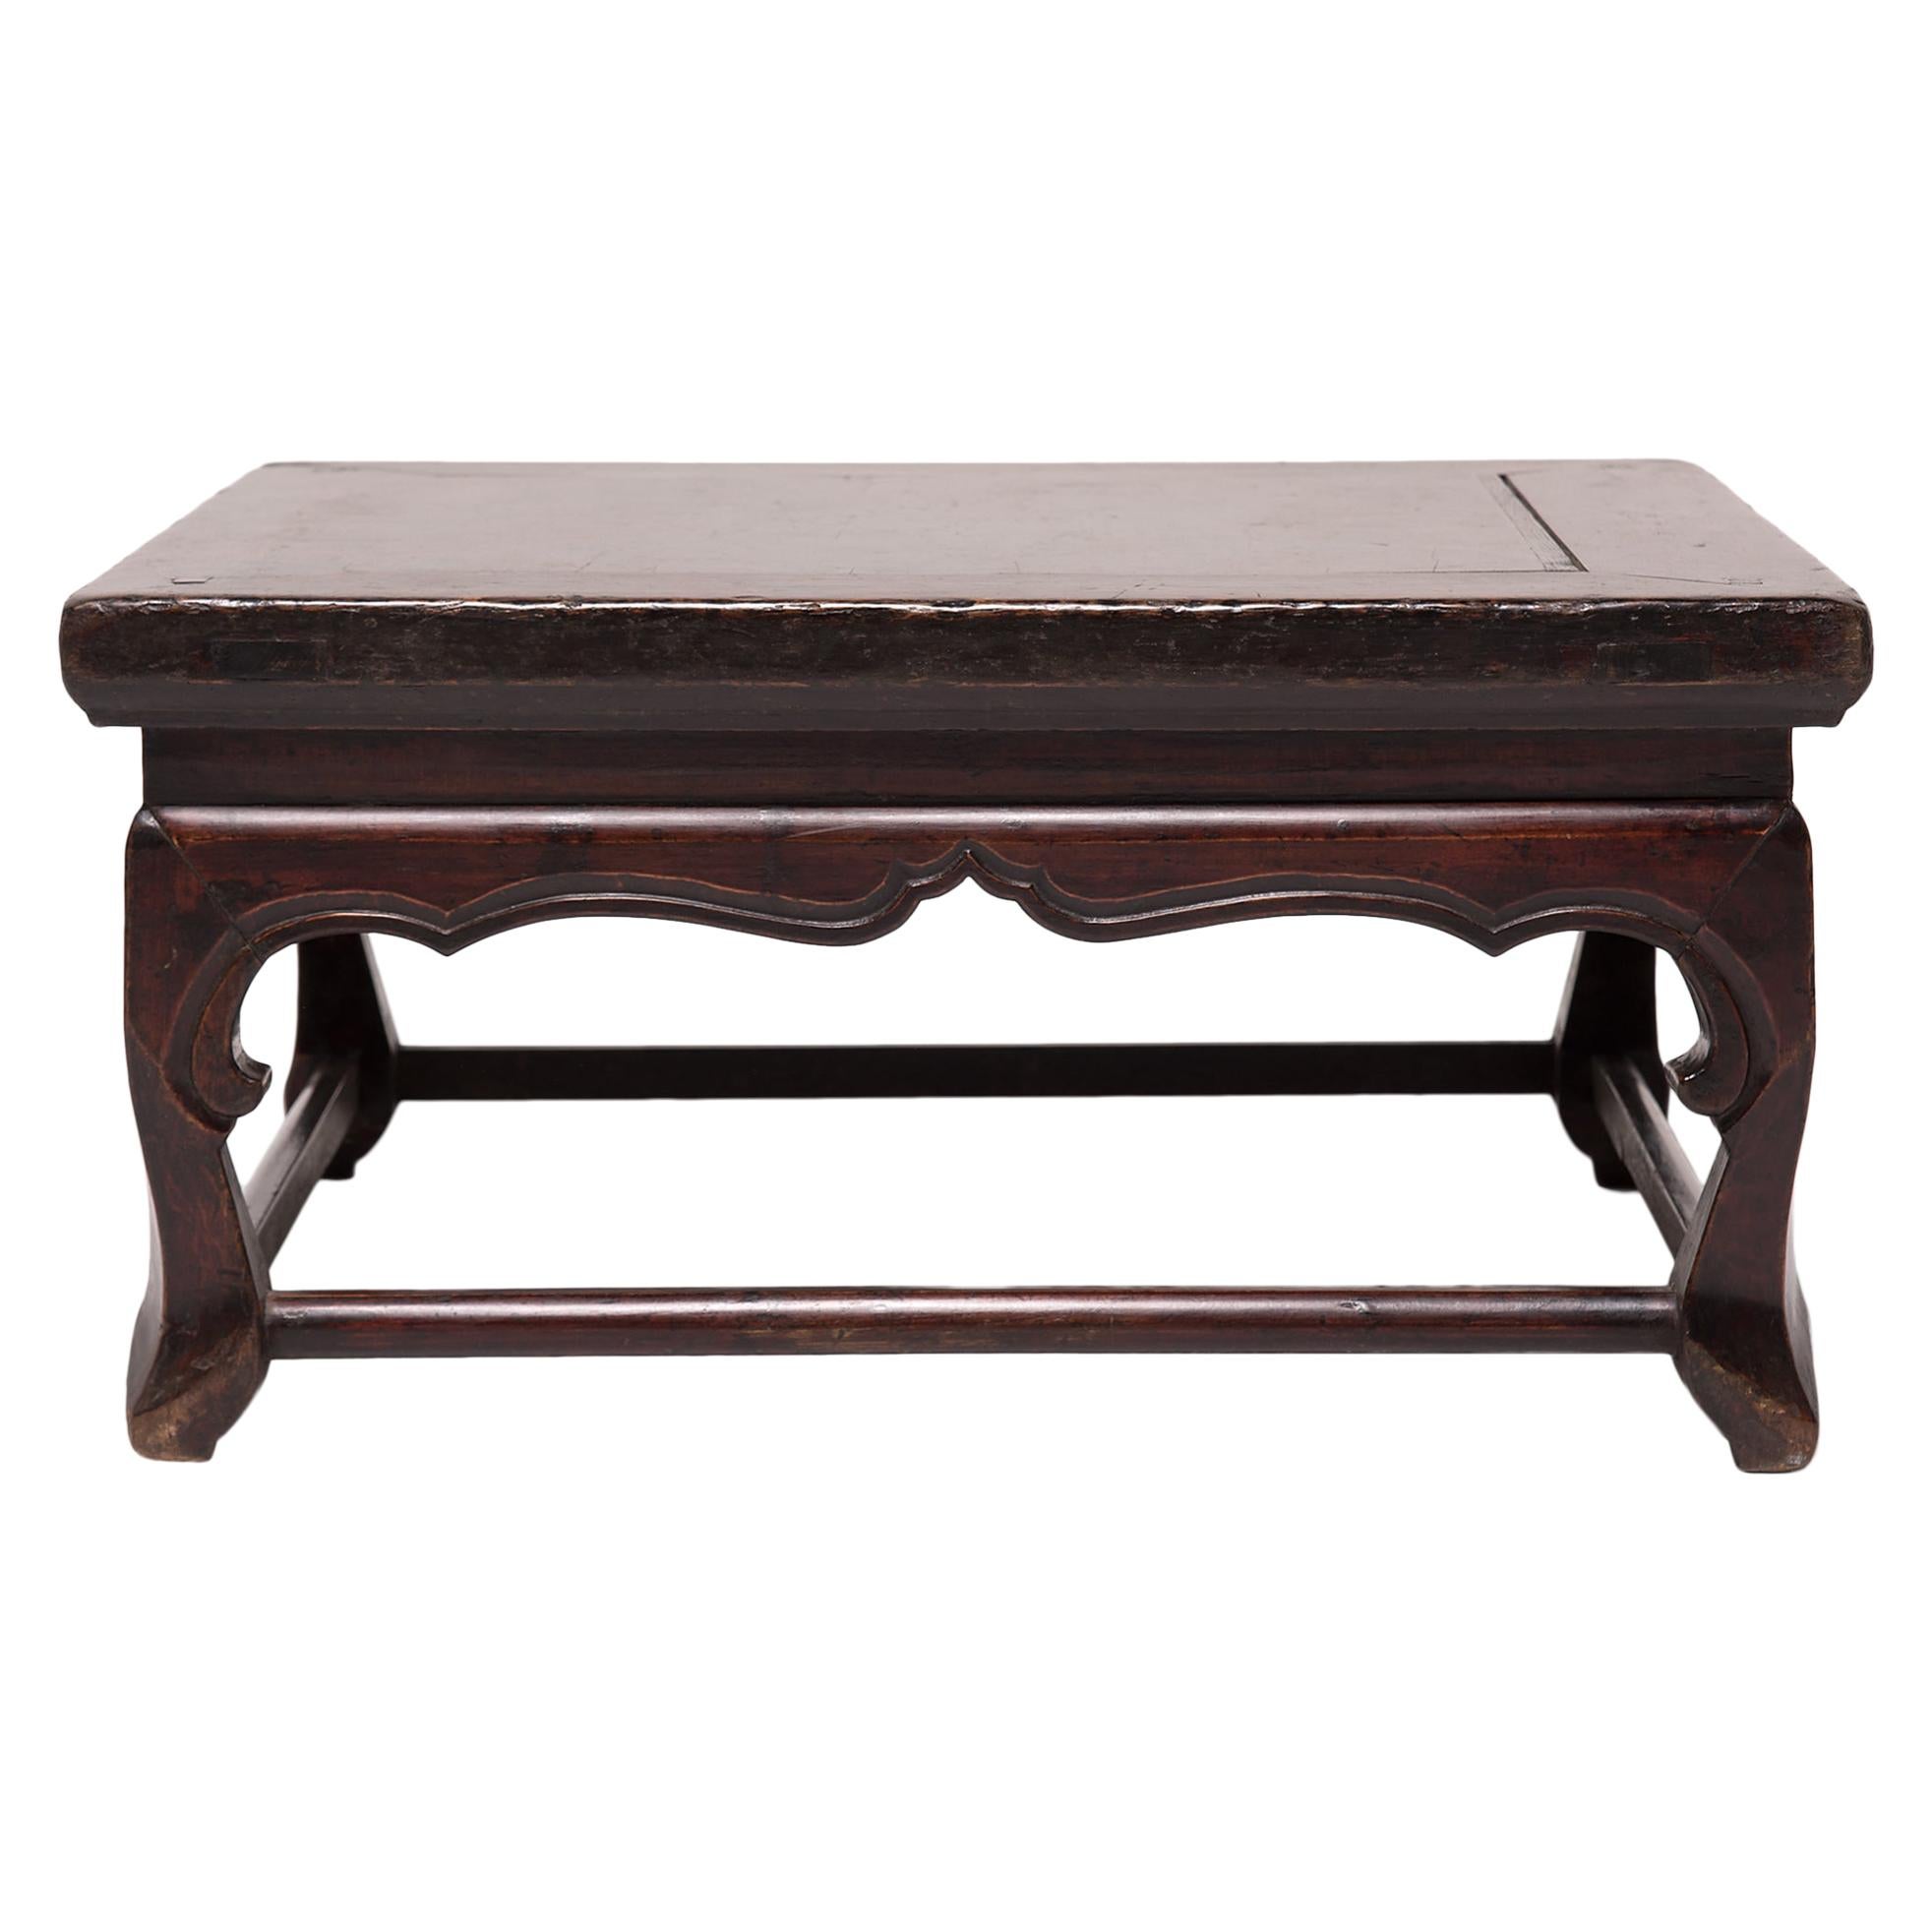 Chinese Low Waisted Kang Table, c. 1850